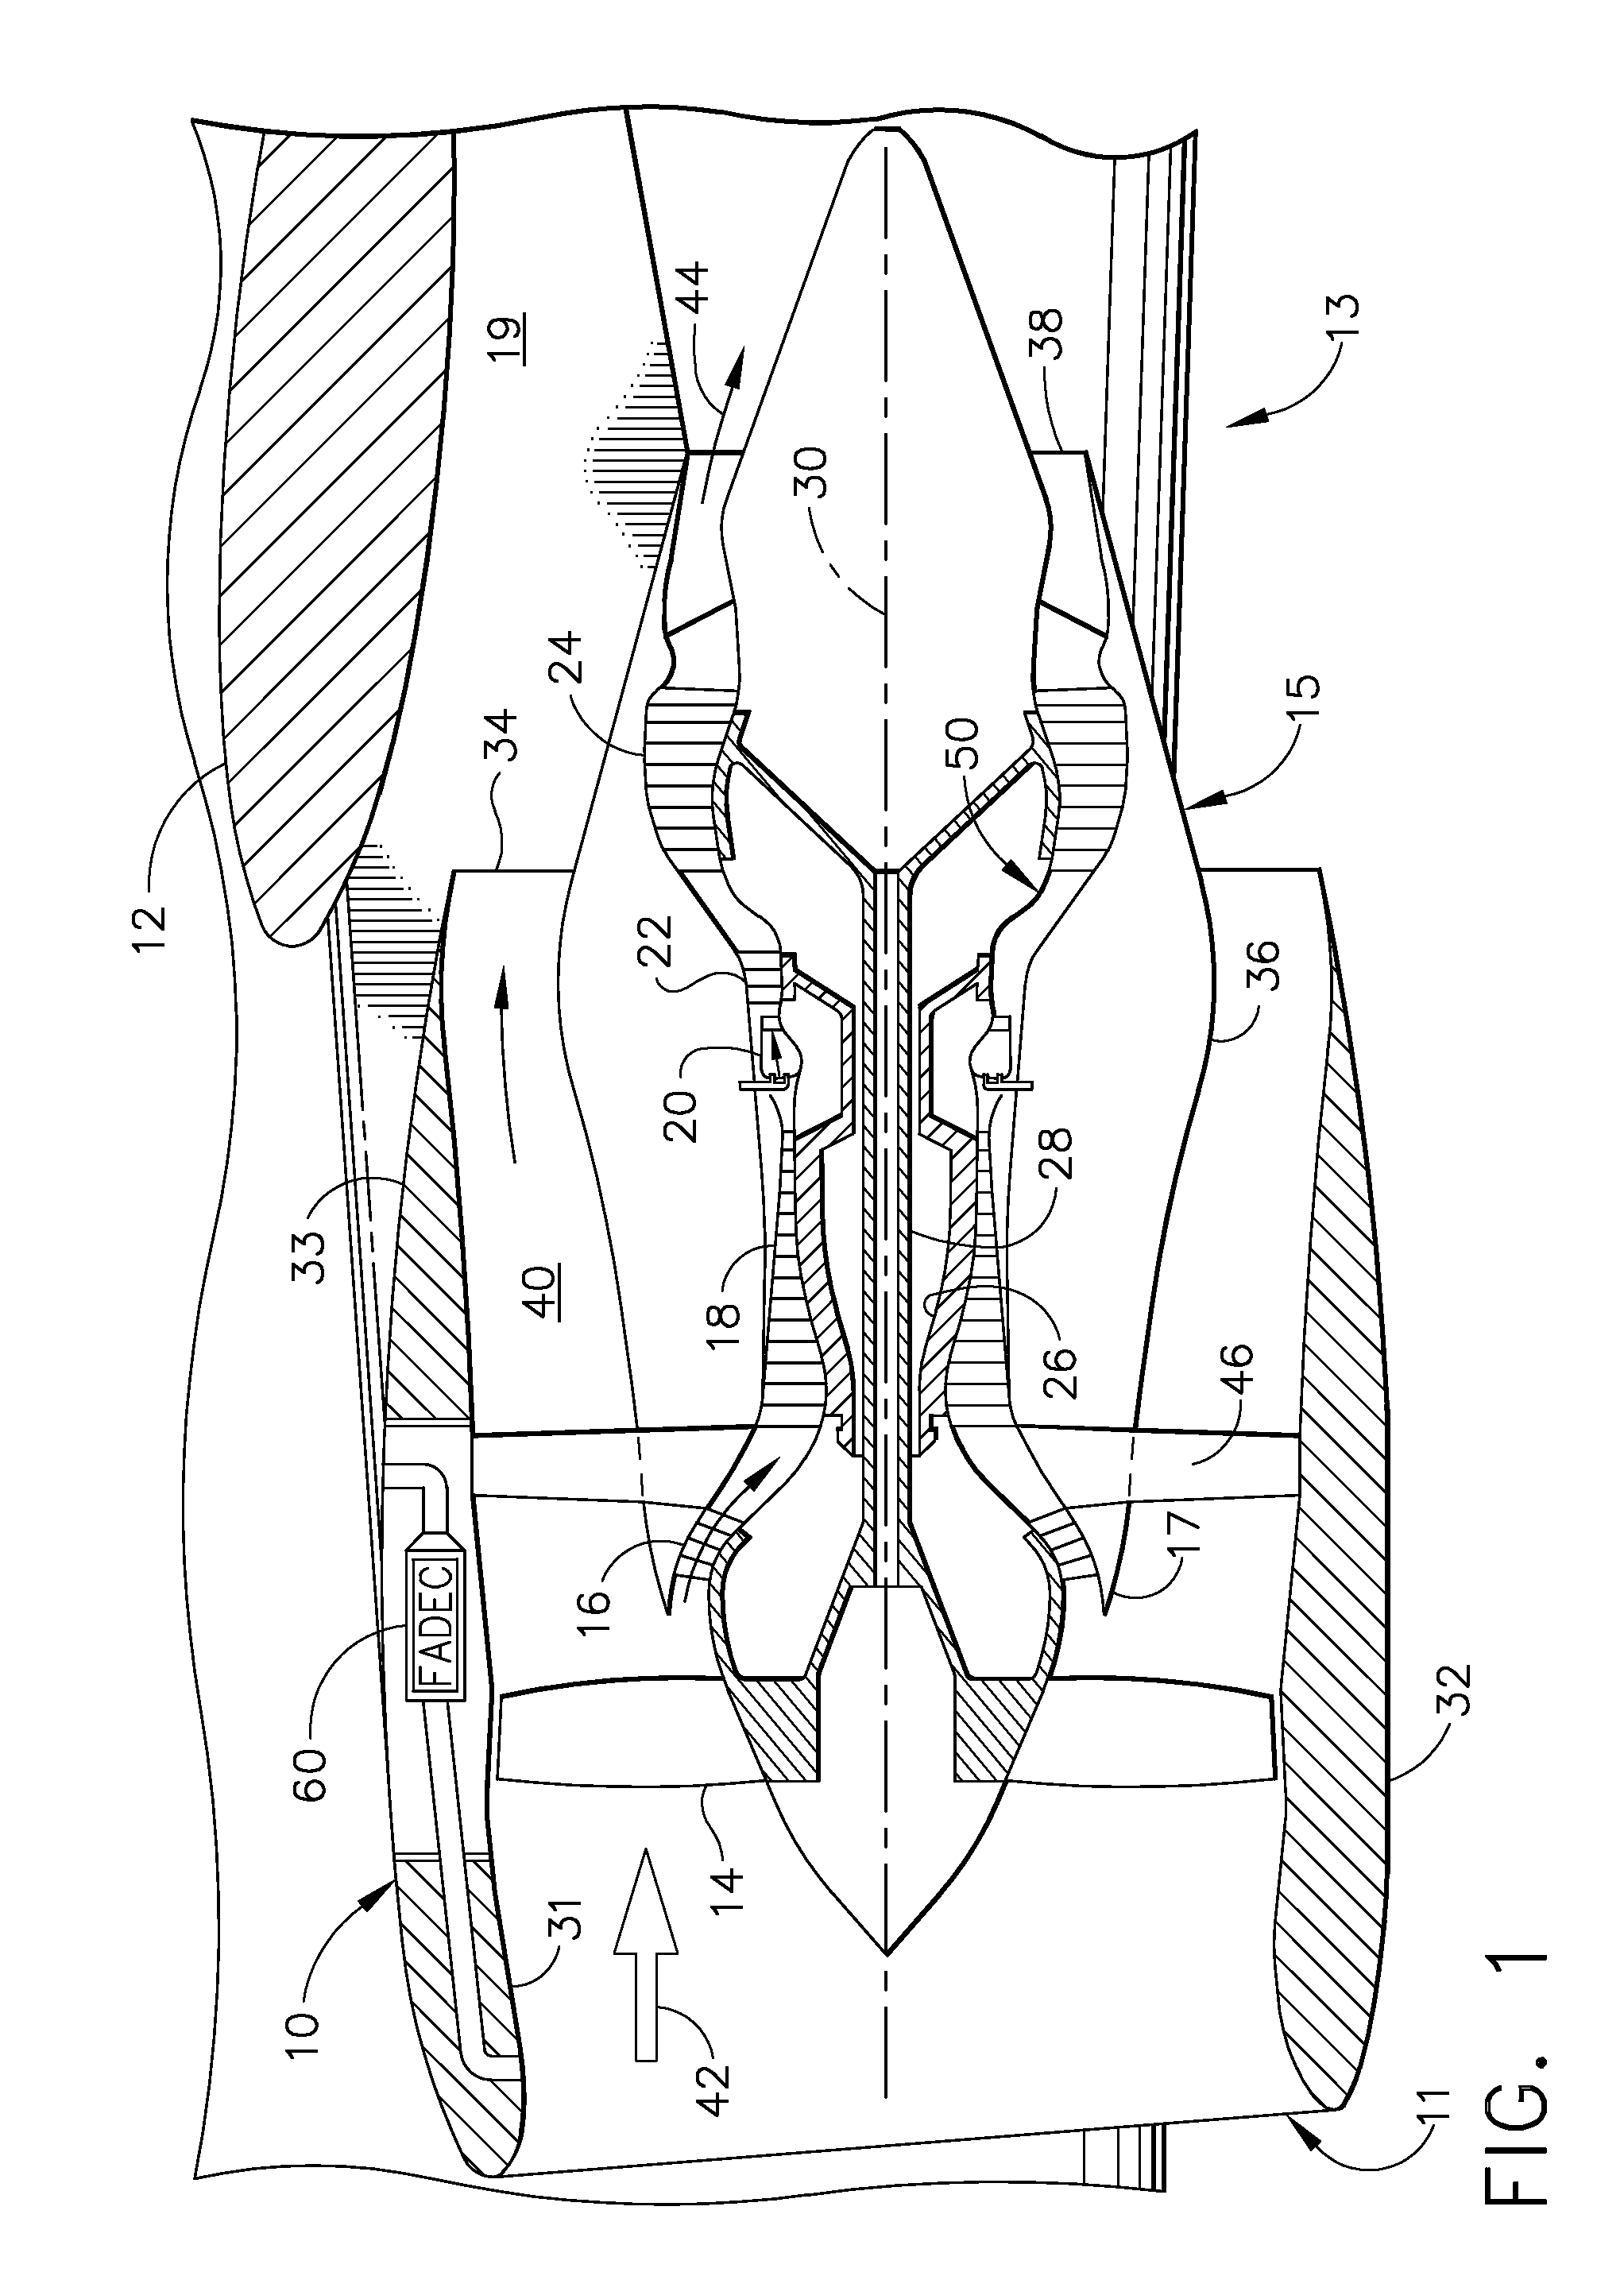 System and method for passive cooling of gas turbine engine control components